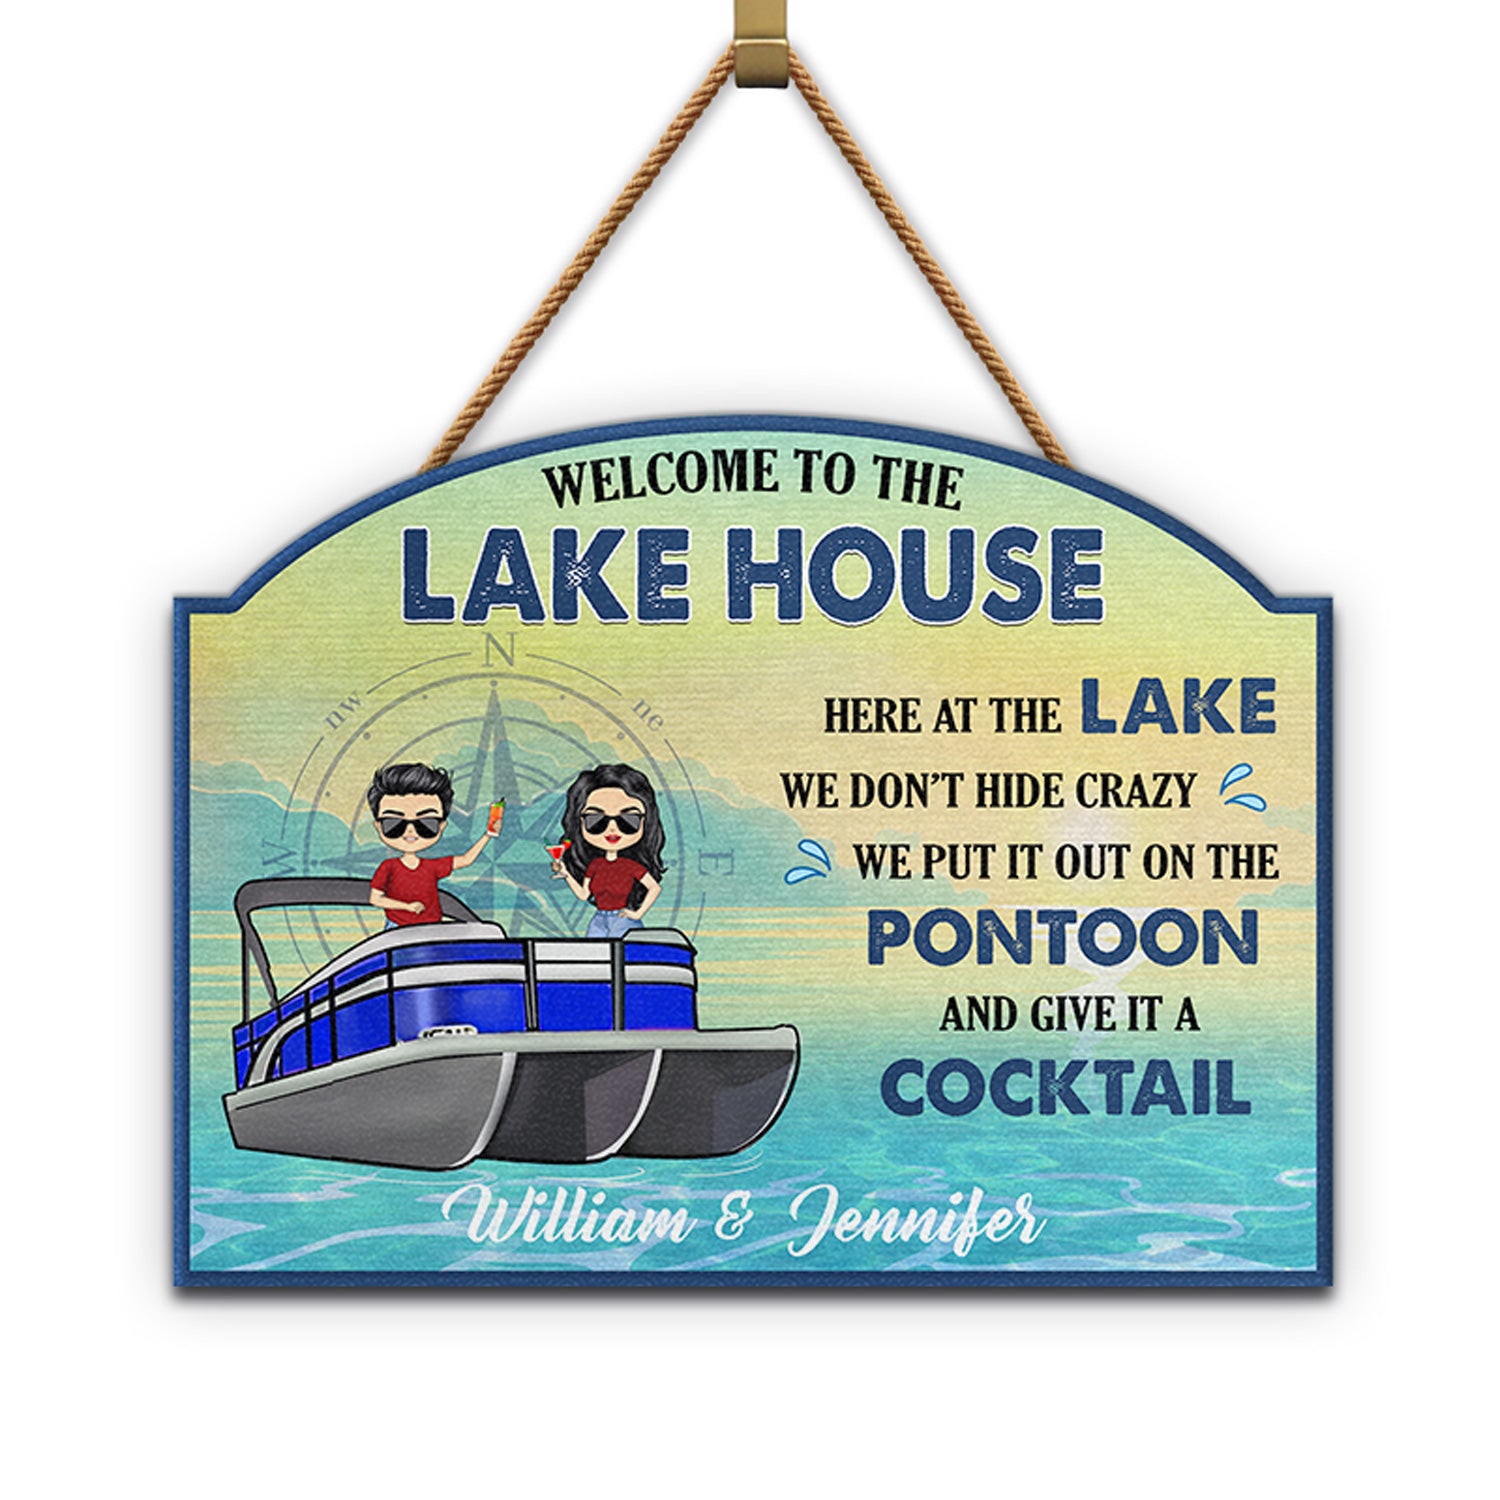 Pontoon Here At The Lake We Don't Hide Crazy - Home Decor, Backyard Decor, Lake House Sign, Gift For Pontooning Lovers, Couples, Husband, Wife - Personalized Custom Shaped Wood Sign